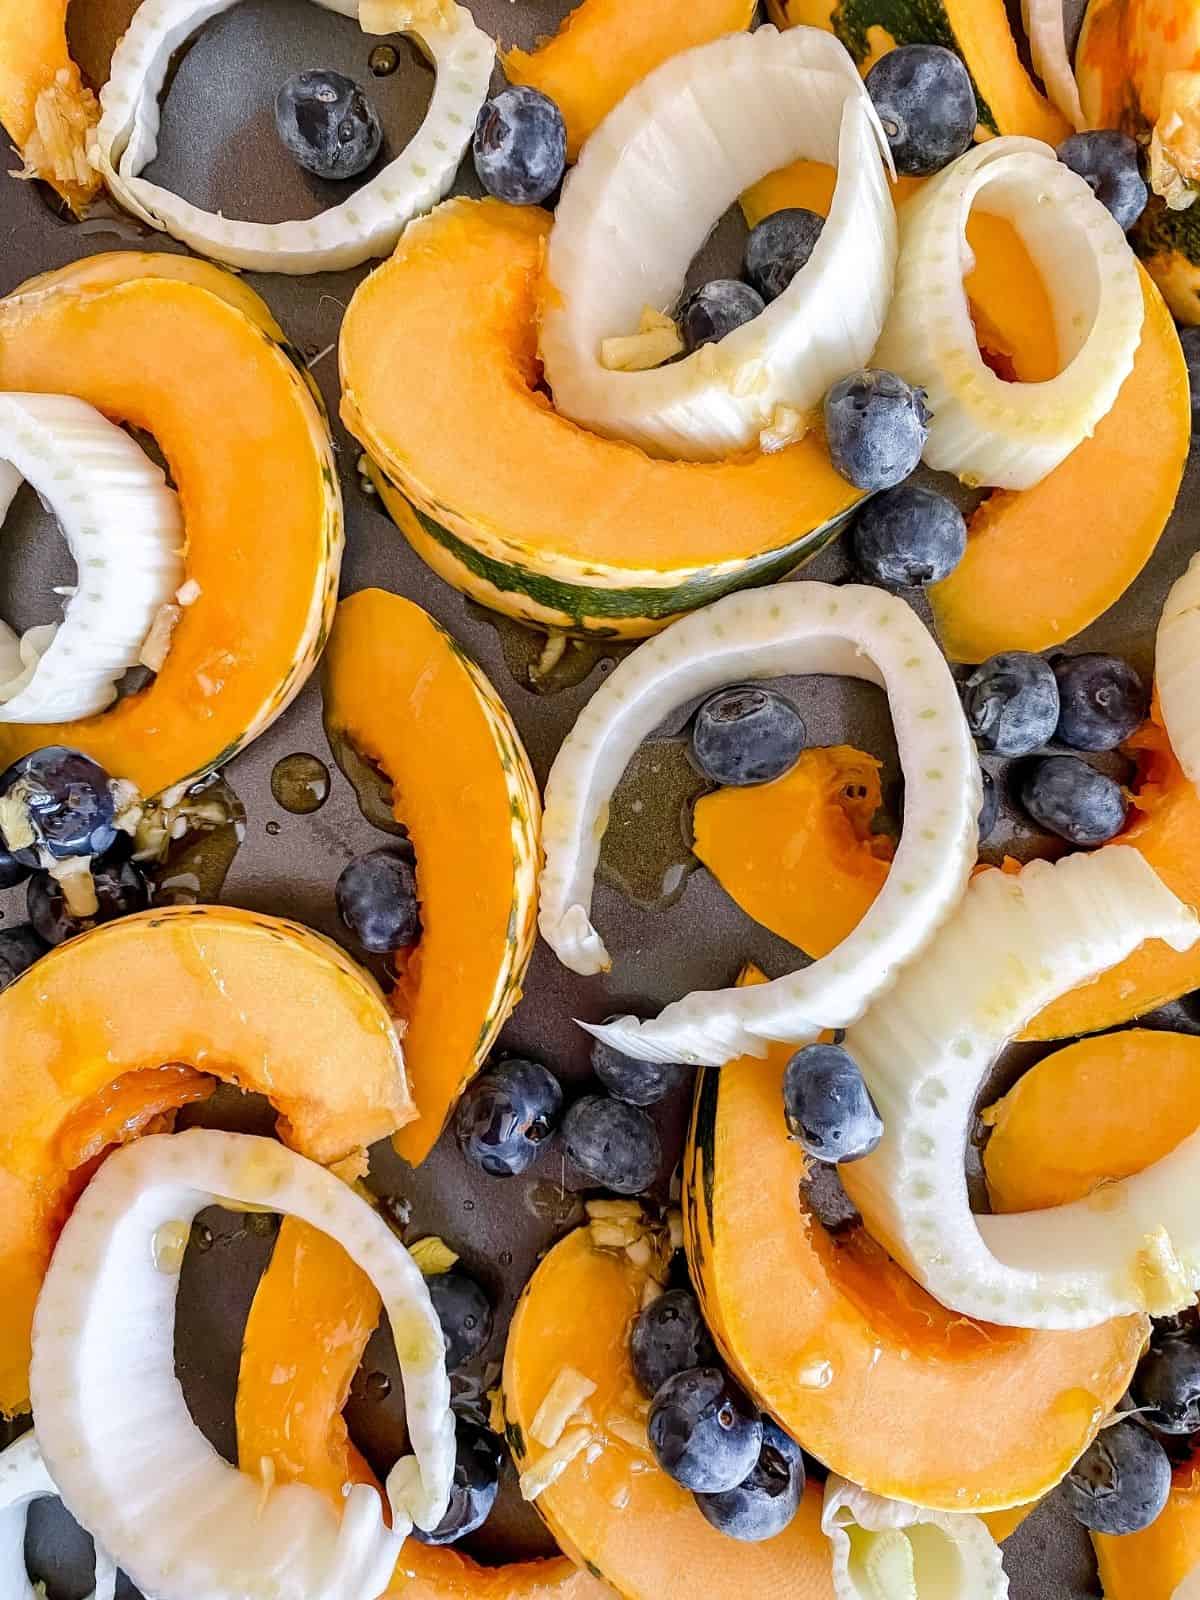 squash, fennel and blueberries on a baking tray.